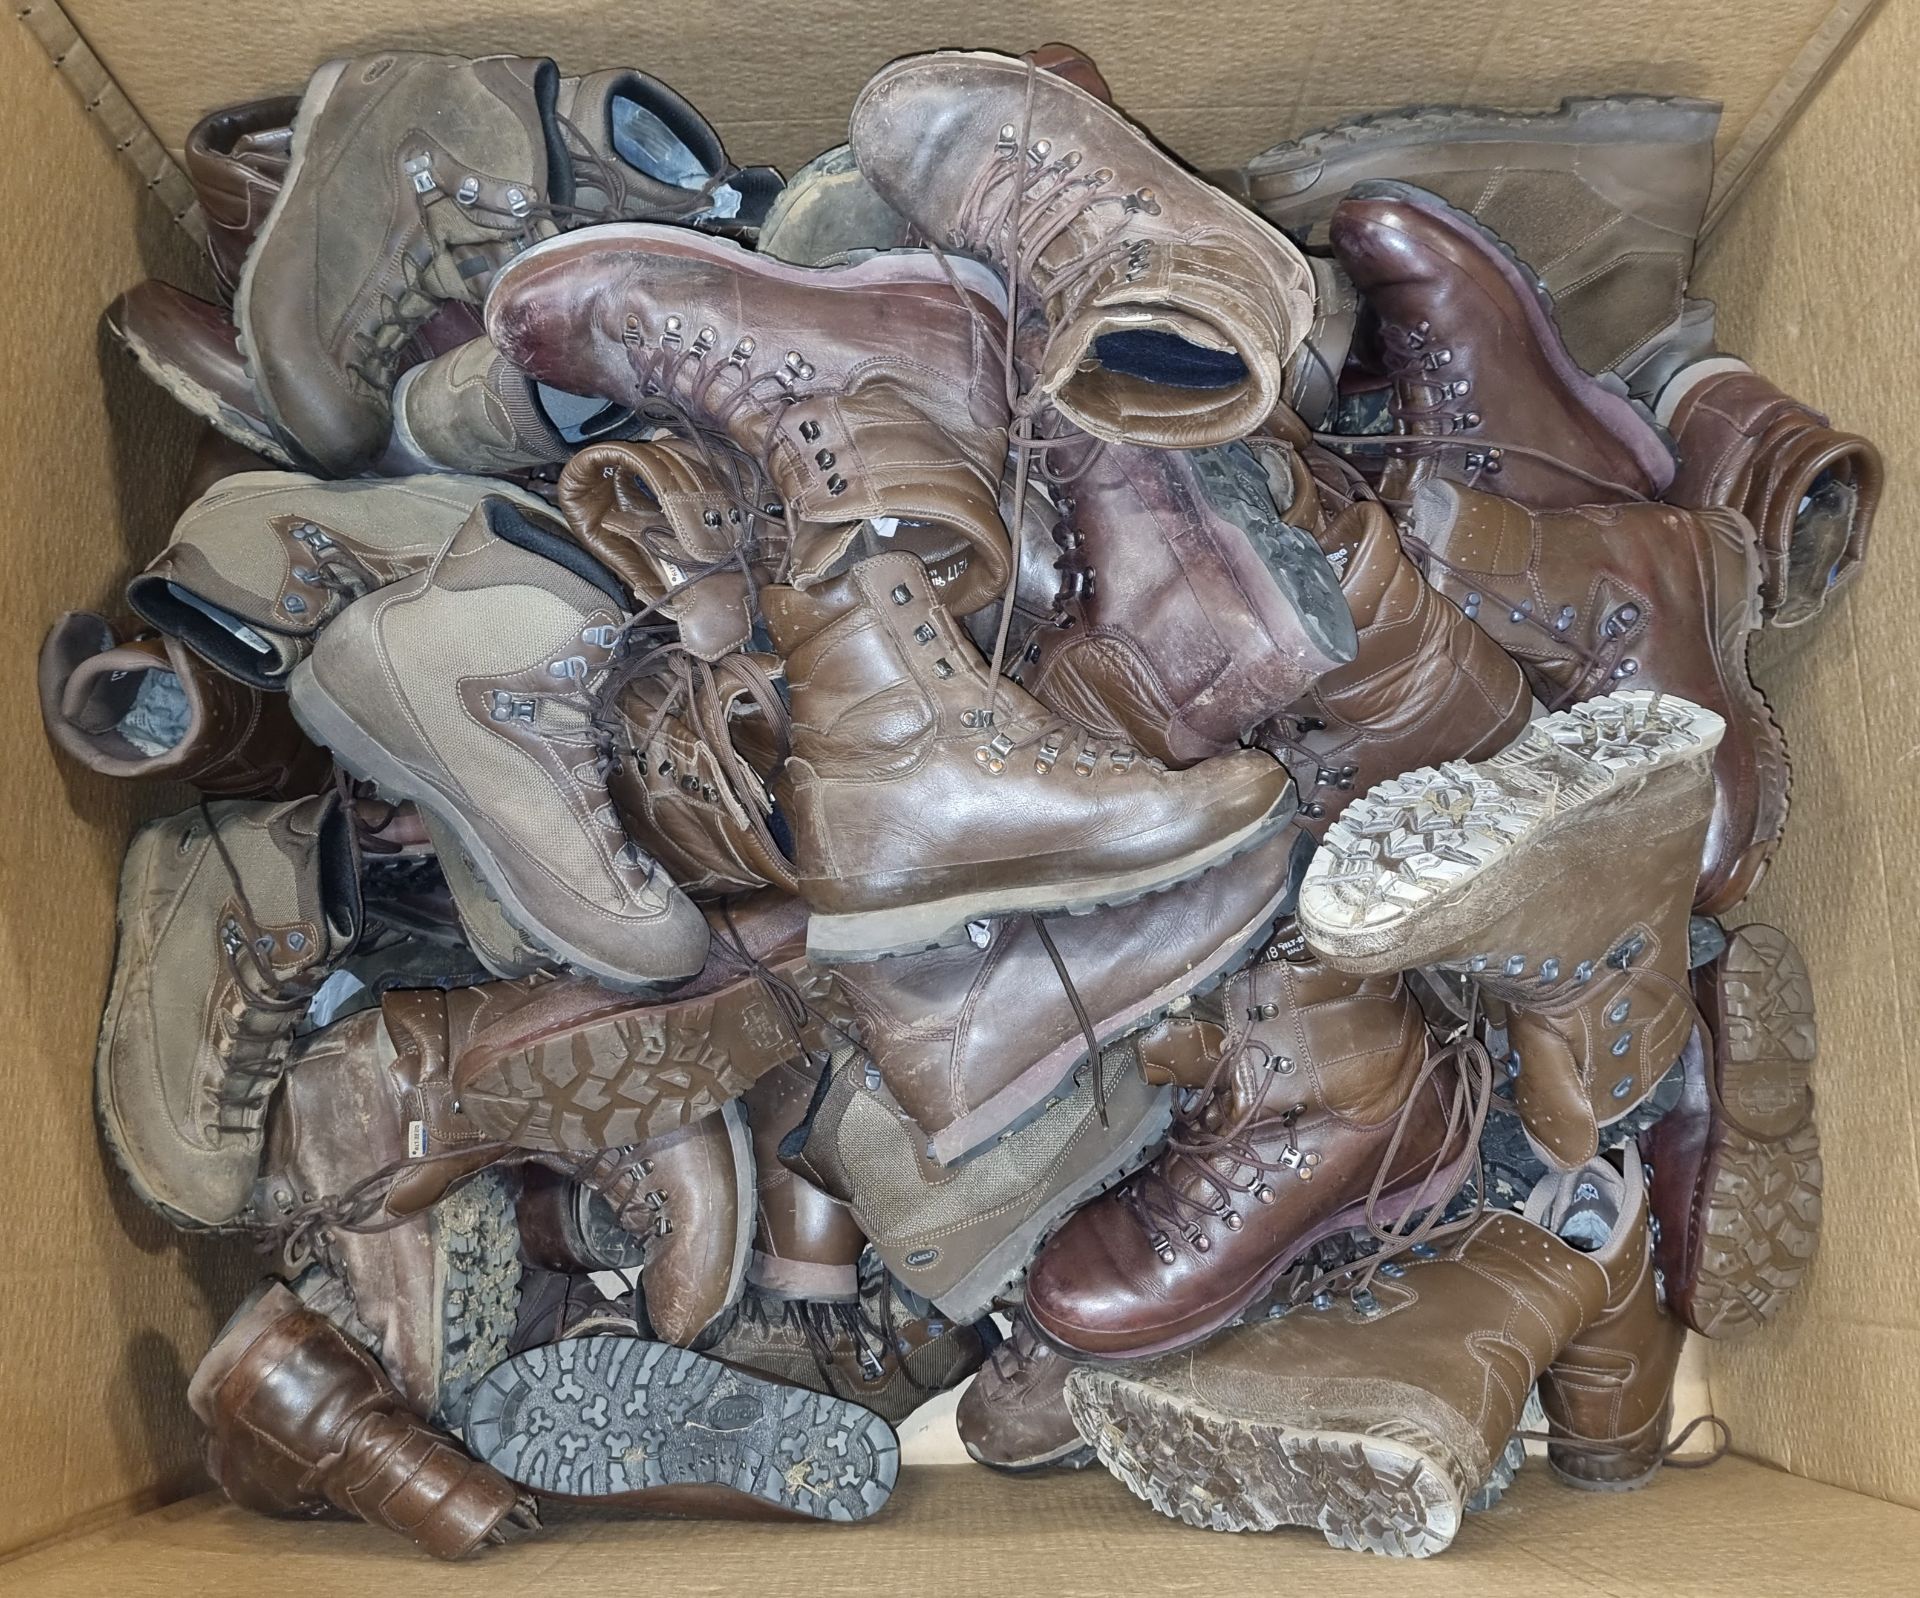 50x pairs of Various Boots including Magnum, Iturri & YDS - mixed grades and sizes